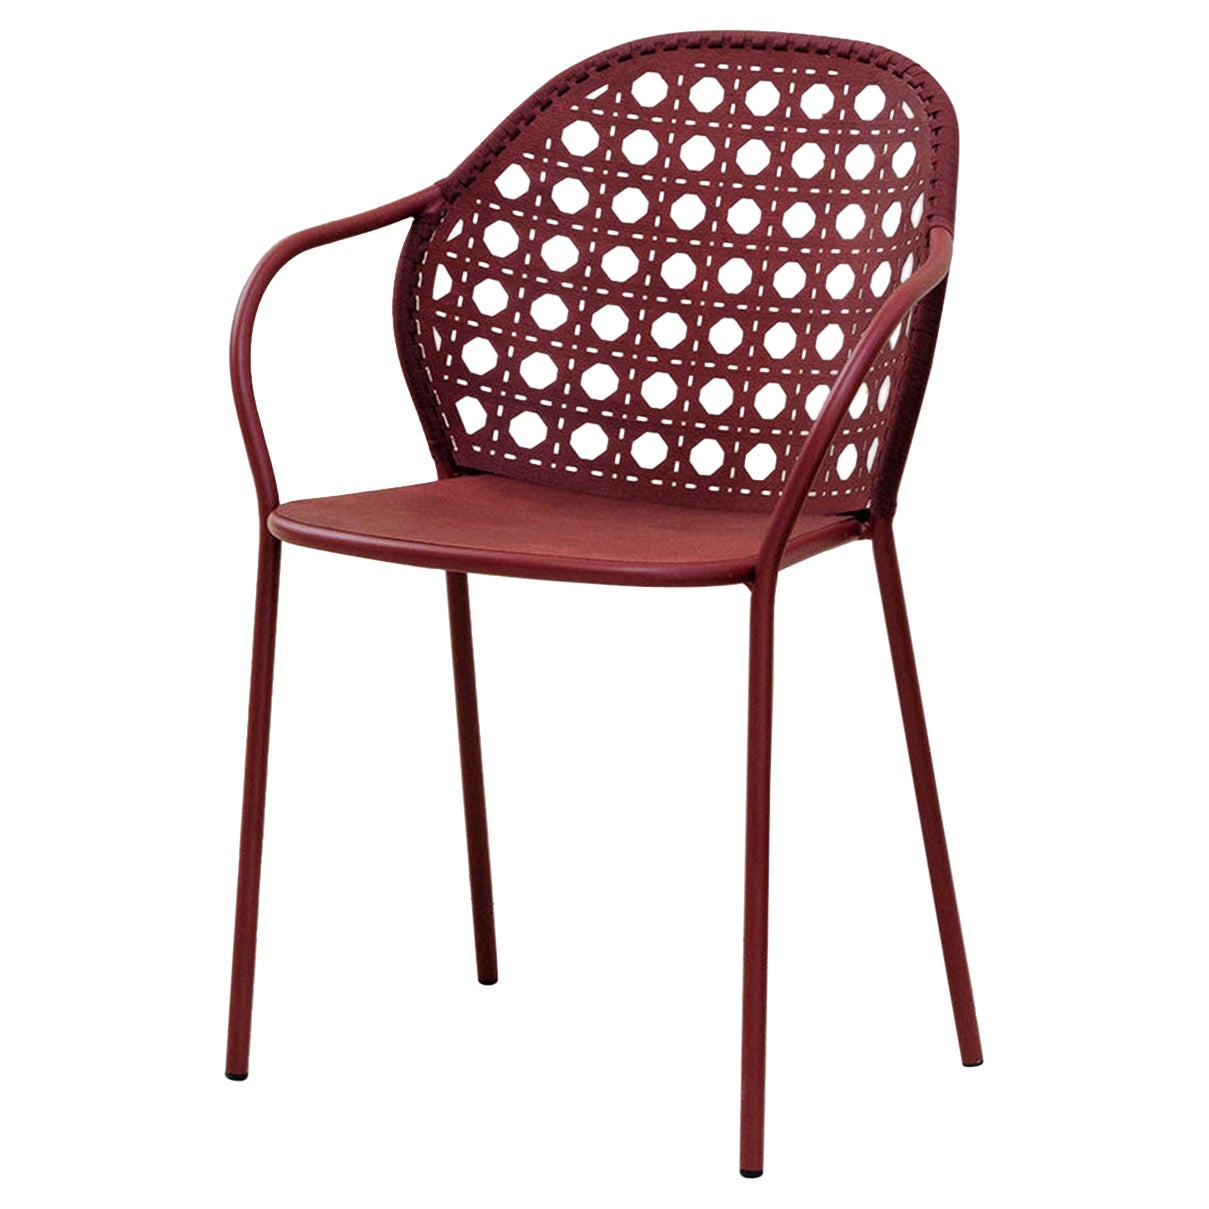 Vick Arm Outdoor Chair